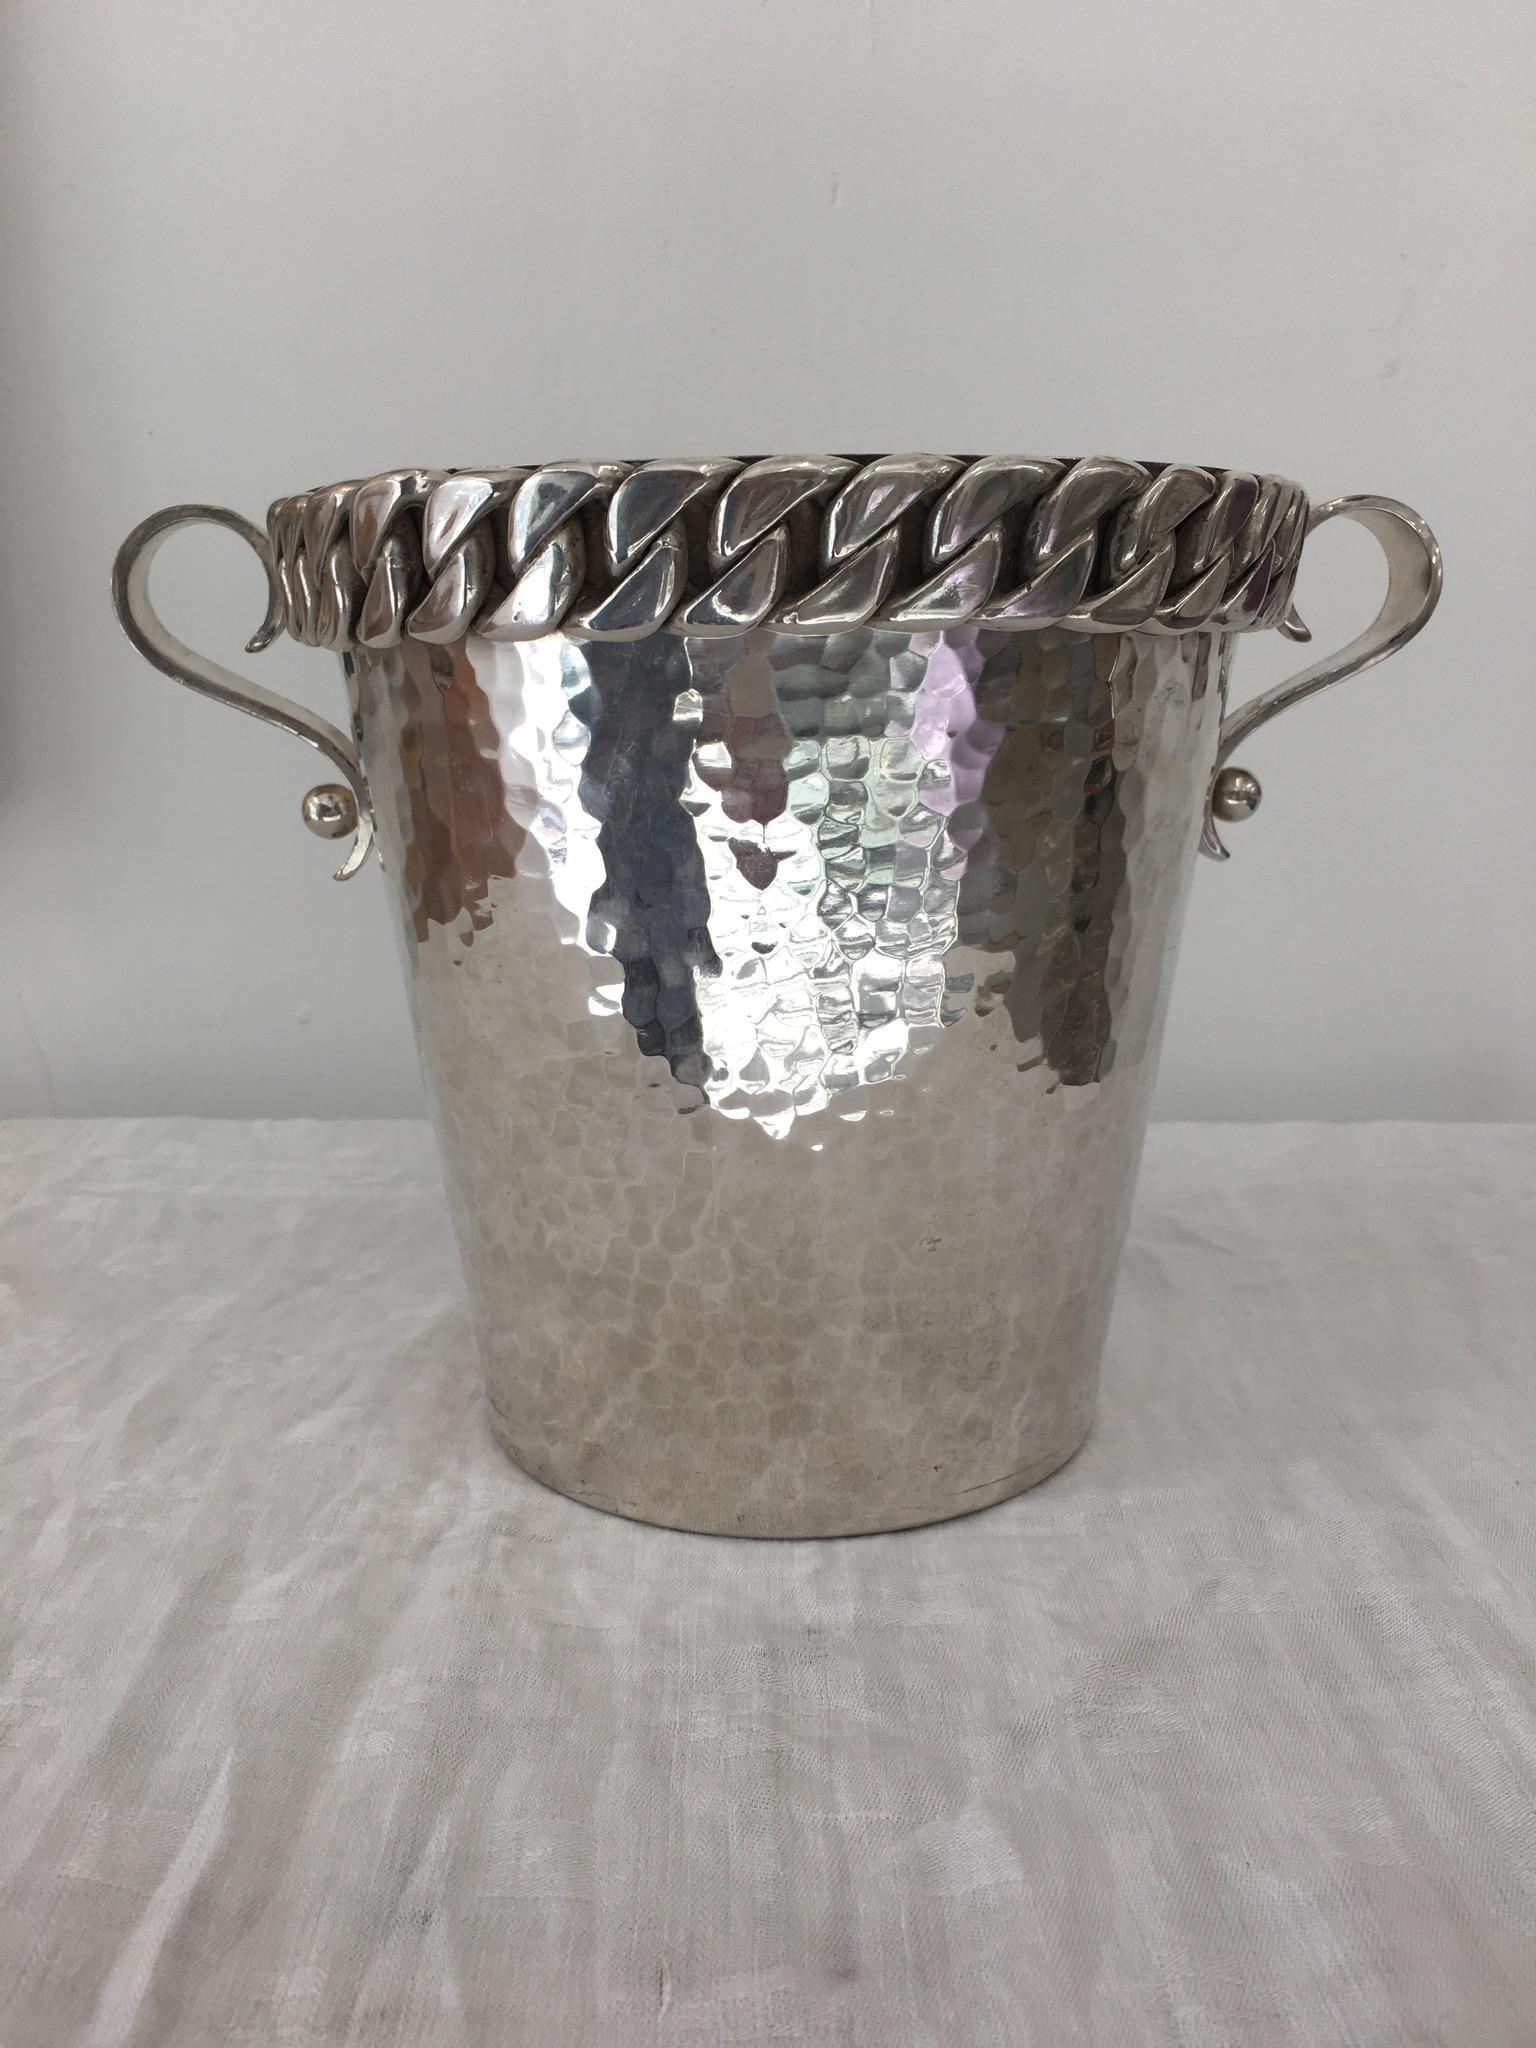 Midcentury Refined design signed underneath Jean Despres 1950 for this wine bottle Bucket in hammered silver plated bronze .
A great chain design around the top, classically used by this artist in his creation.
  On the bottom is  written “à la